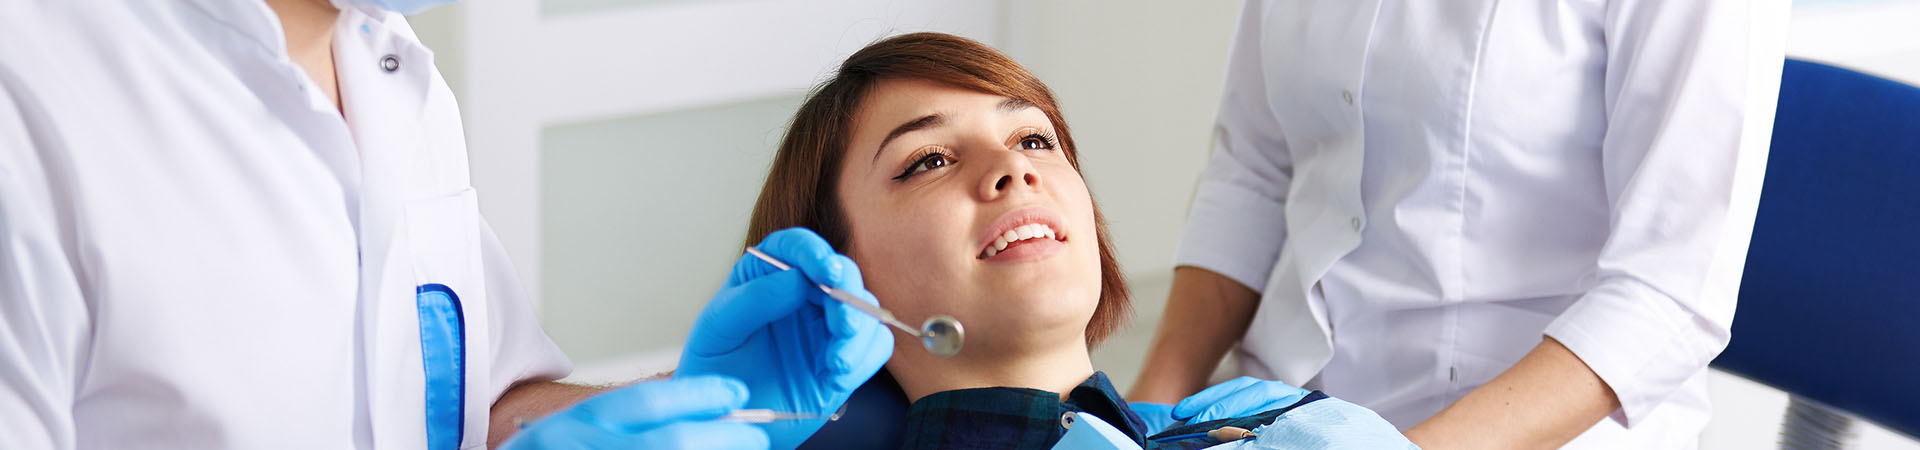 general dentistry at gentle caring dentistry